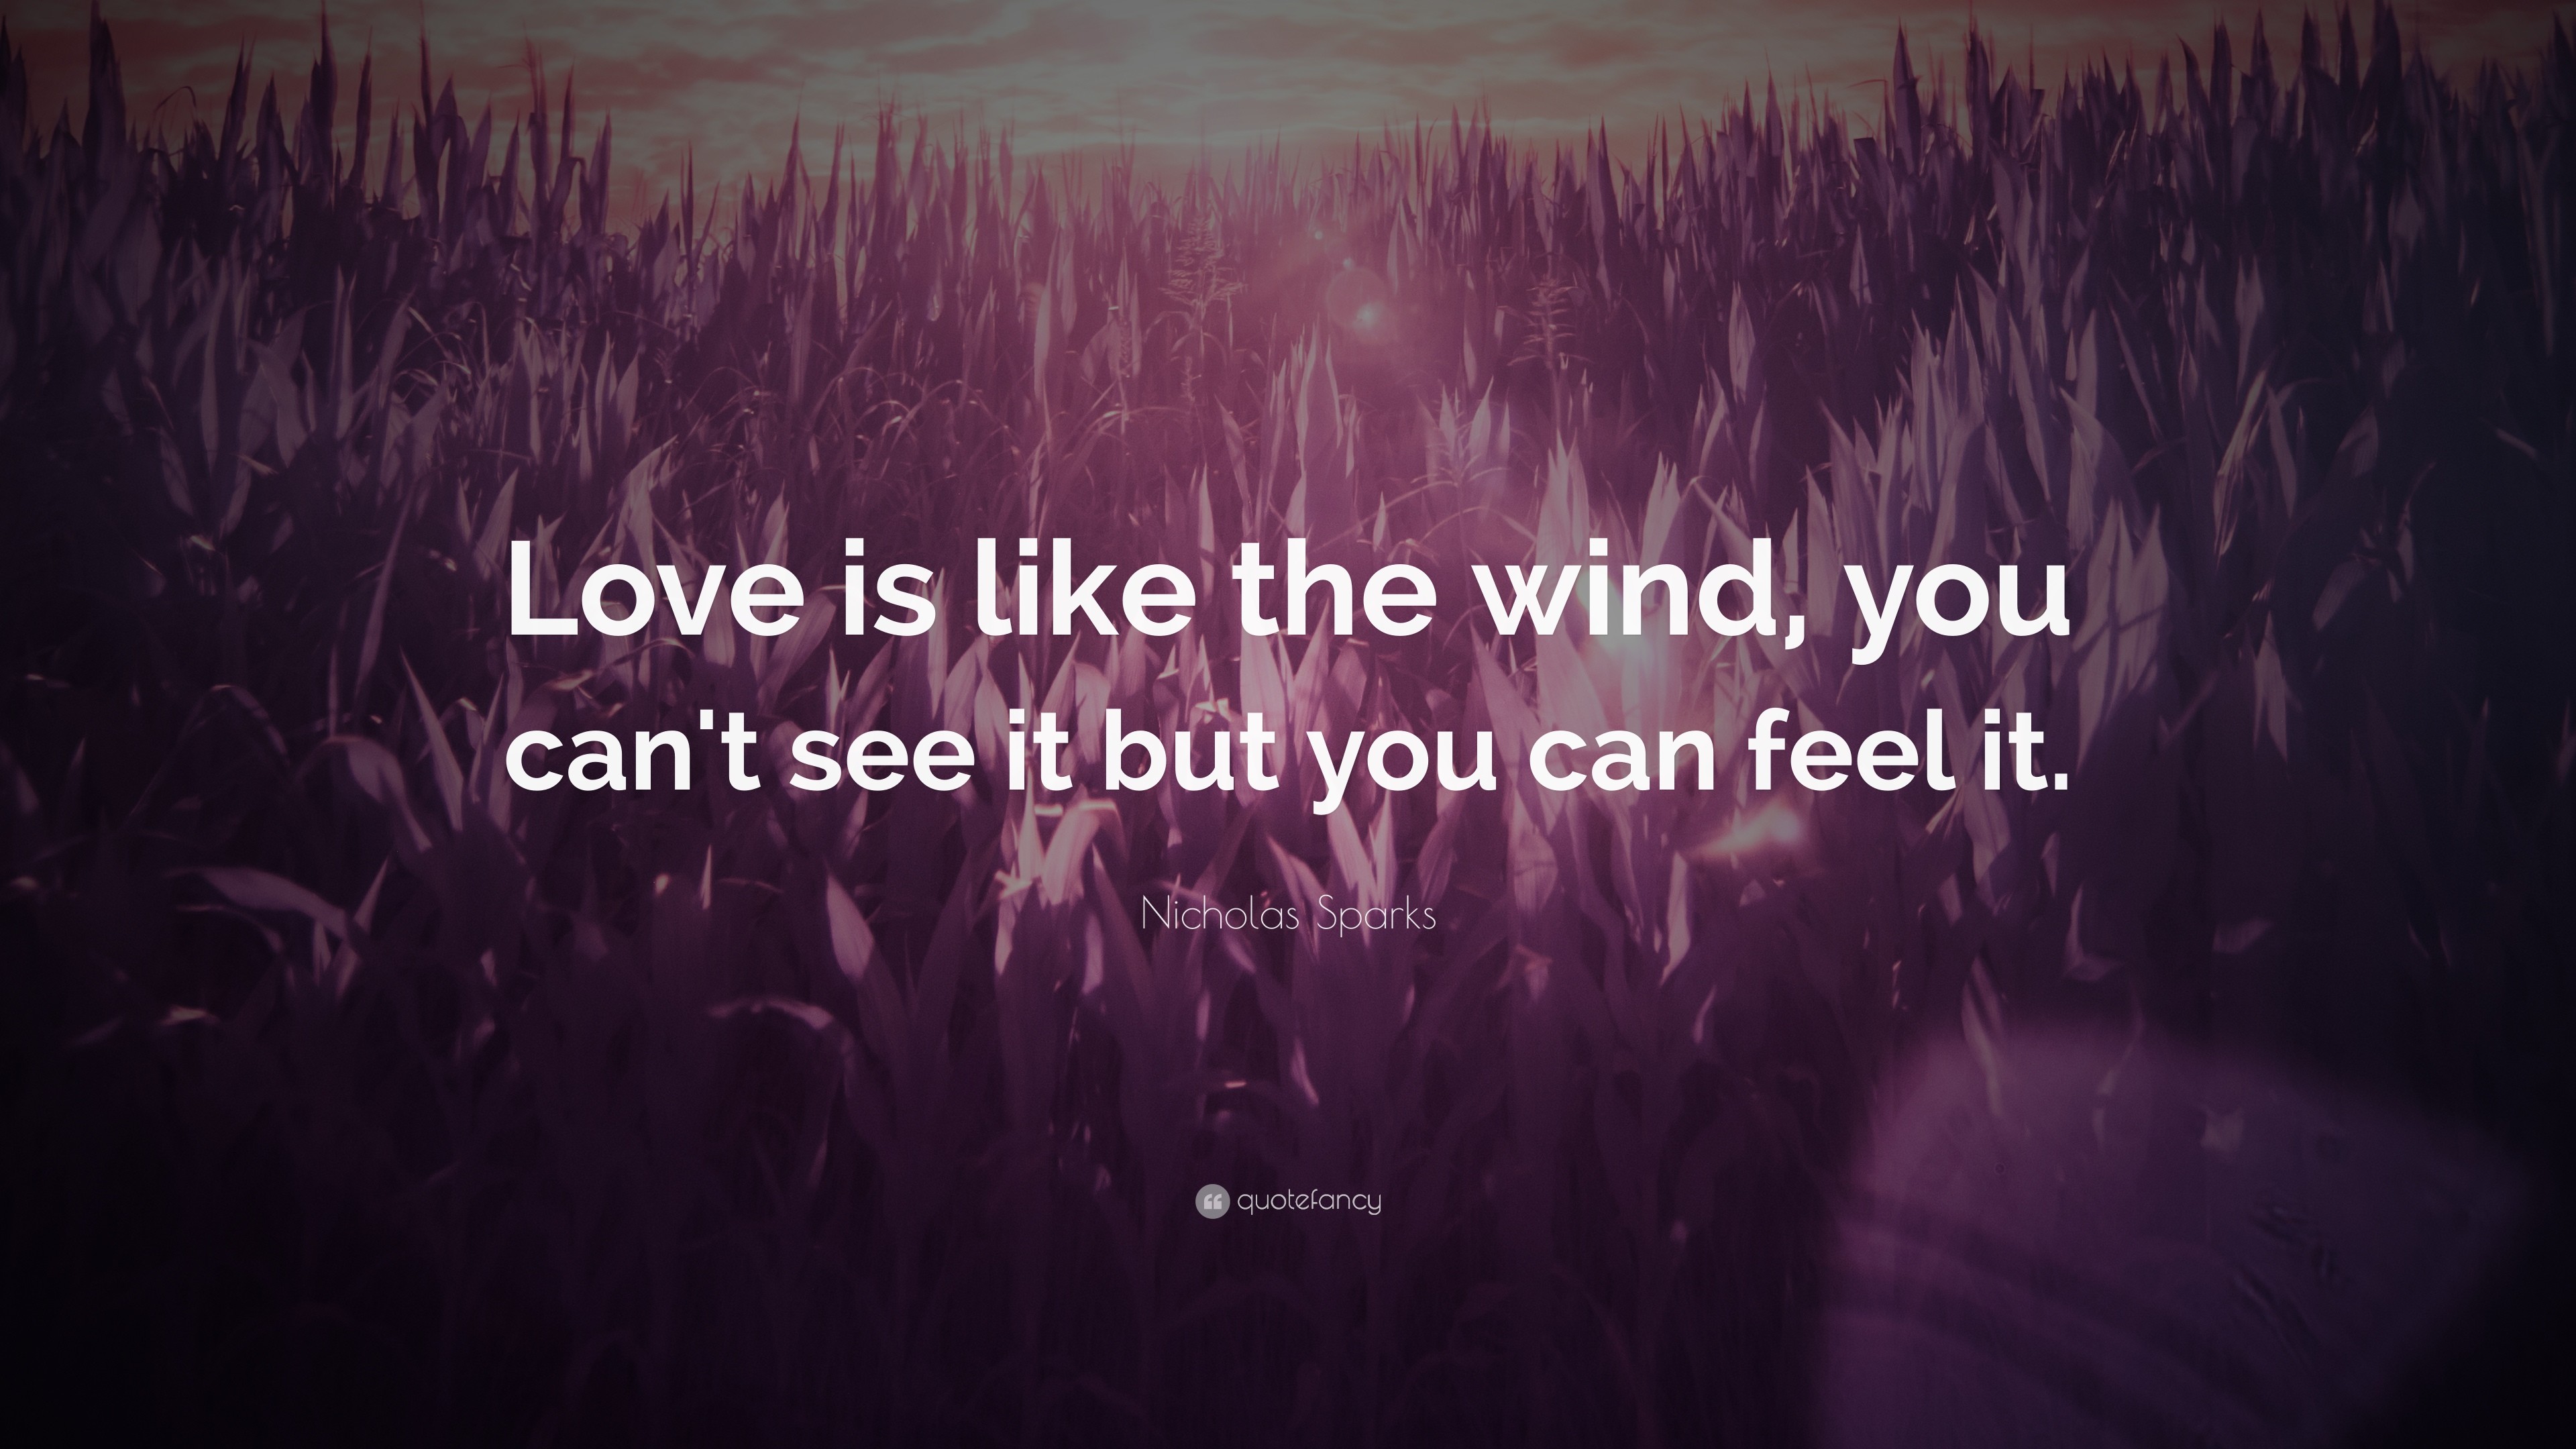 Love Quotes: "Love is like the wind, you can't see it 3840x2160.